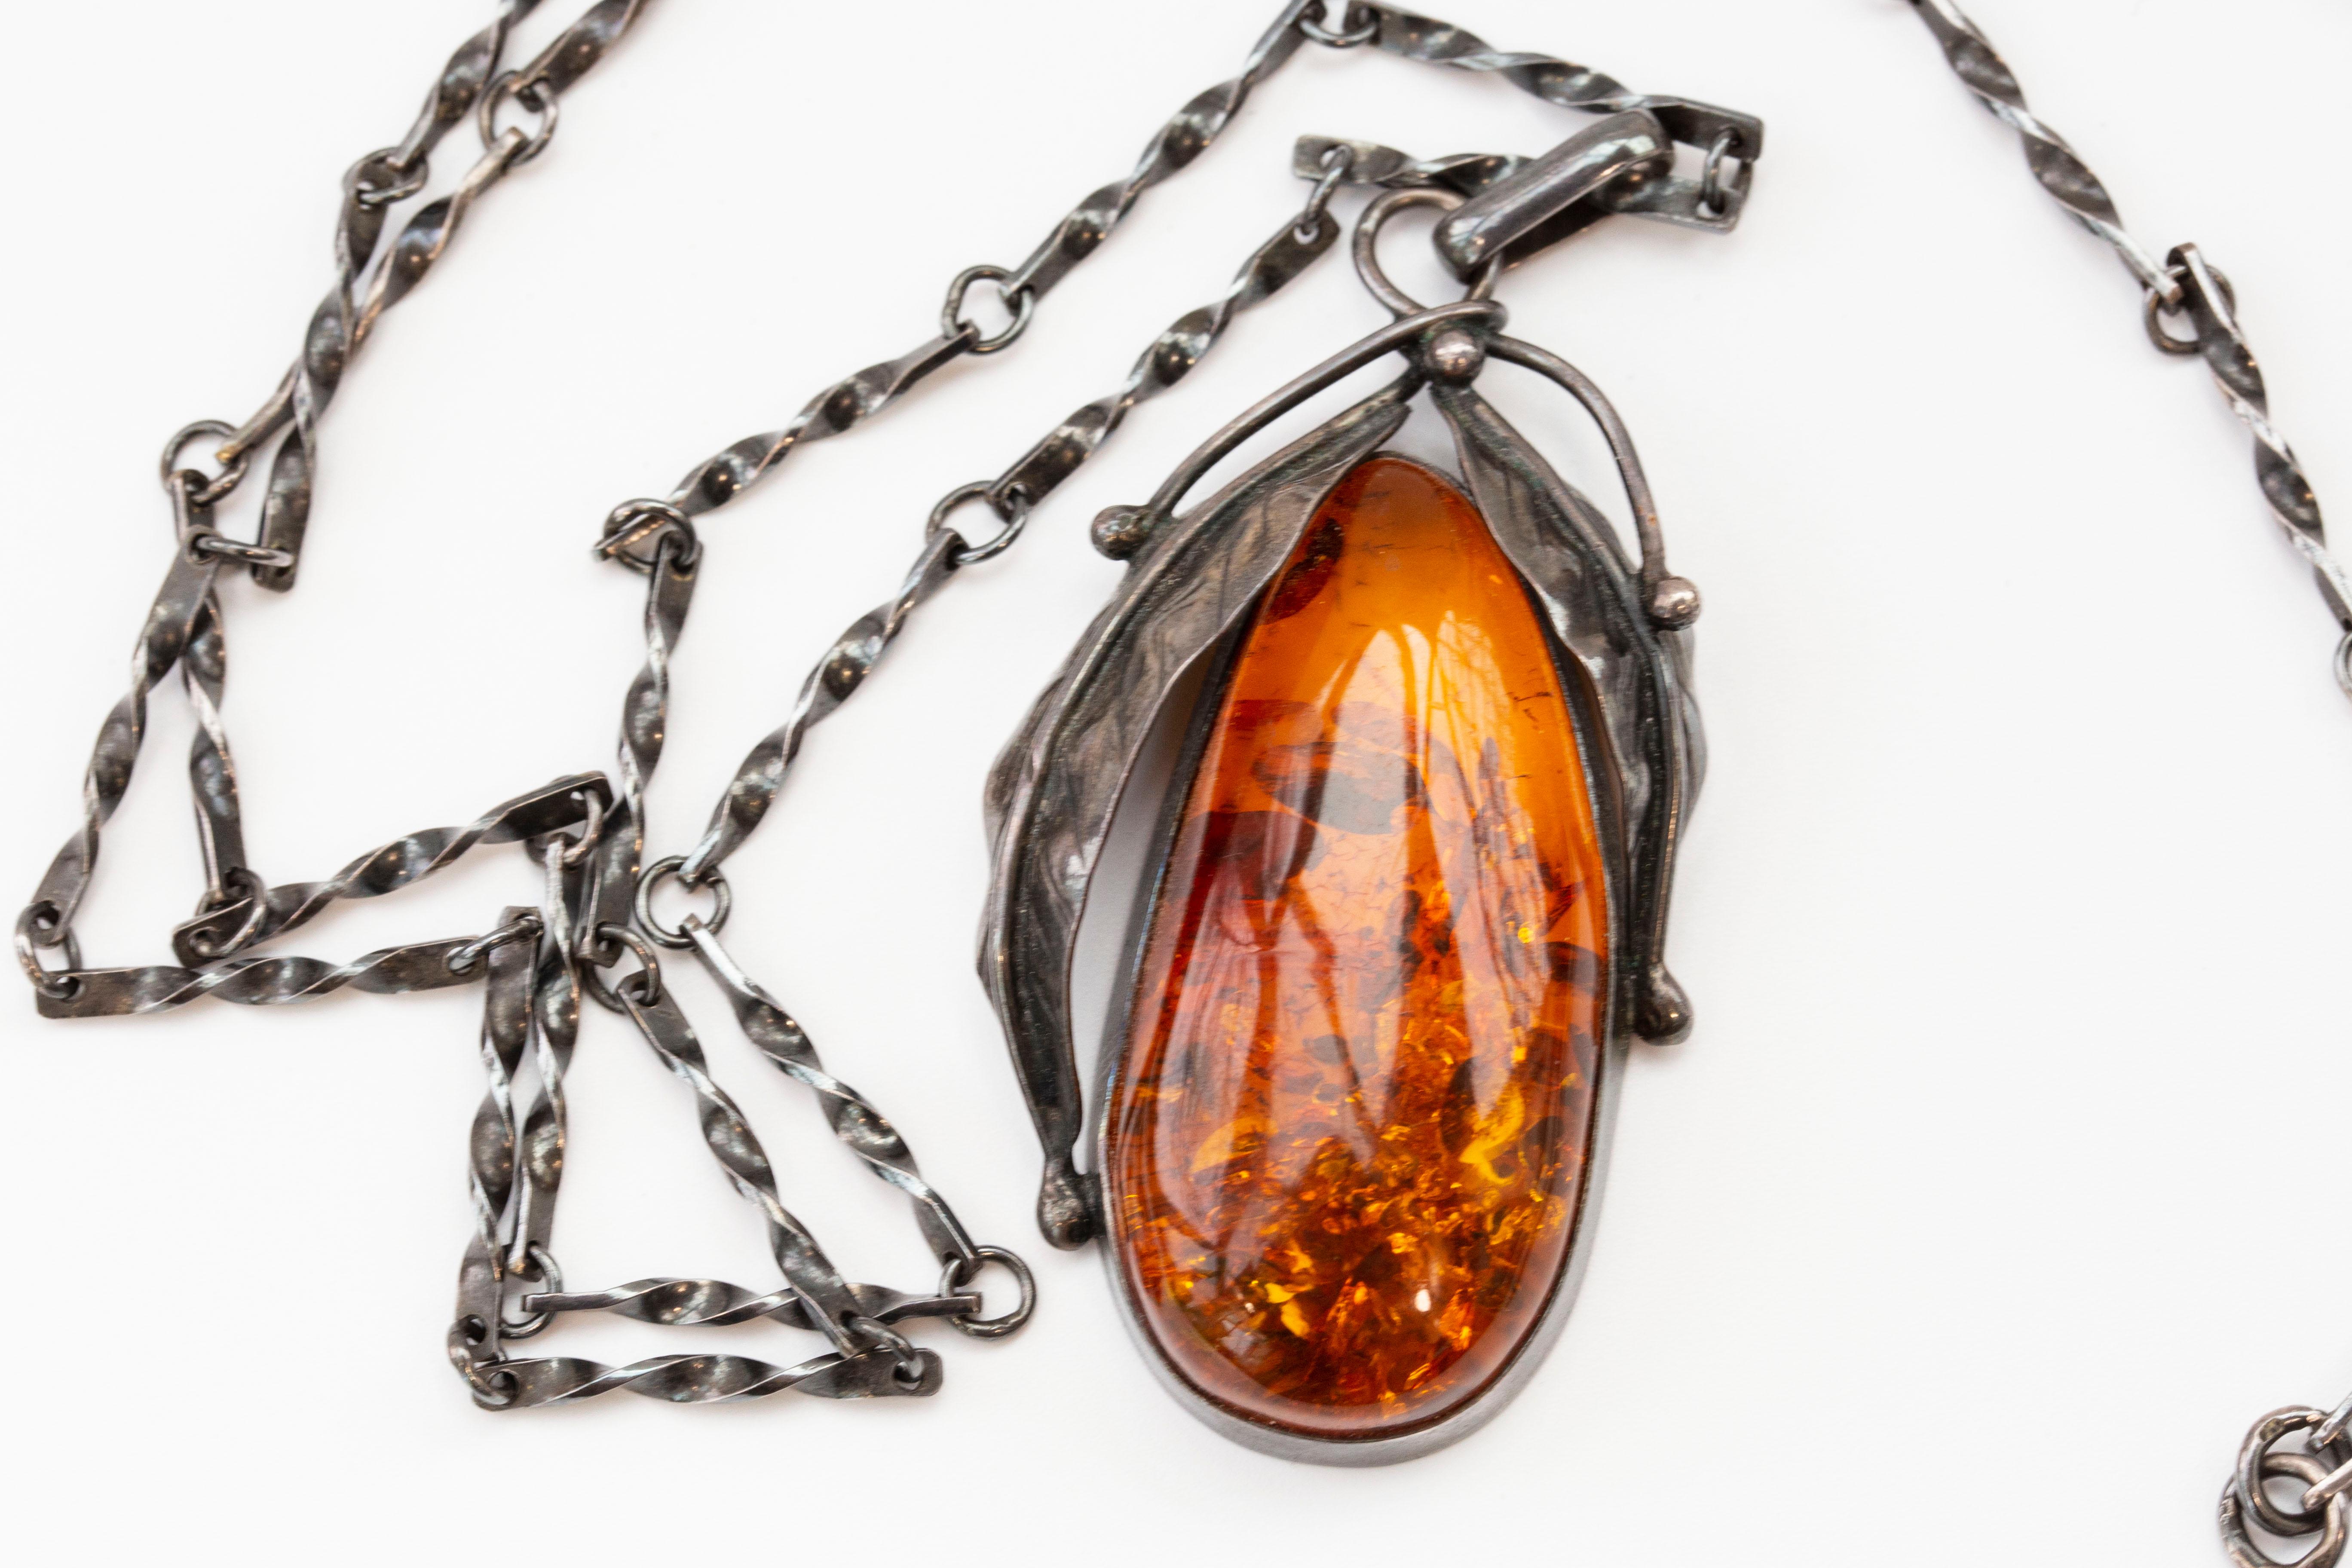 Silver Link Necklace with Large Baltic Amber Pendant For Sale 1